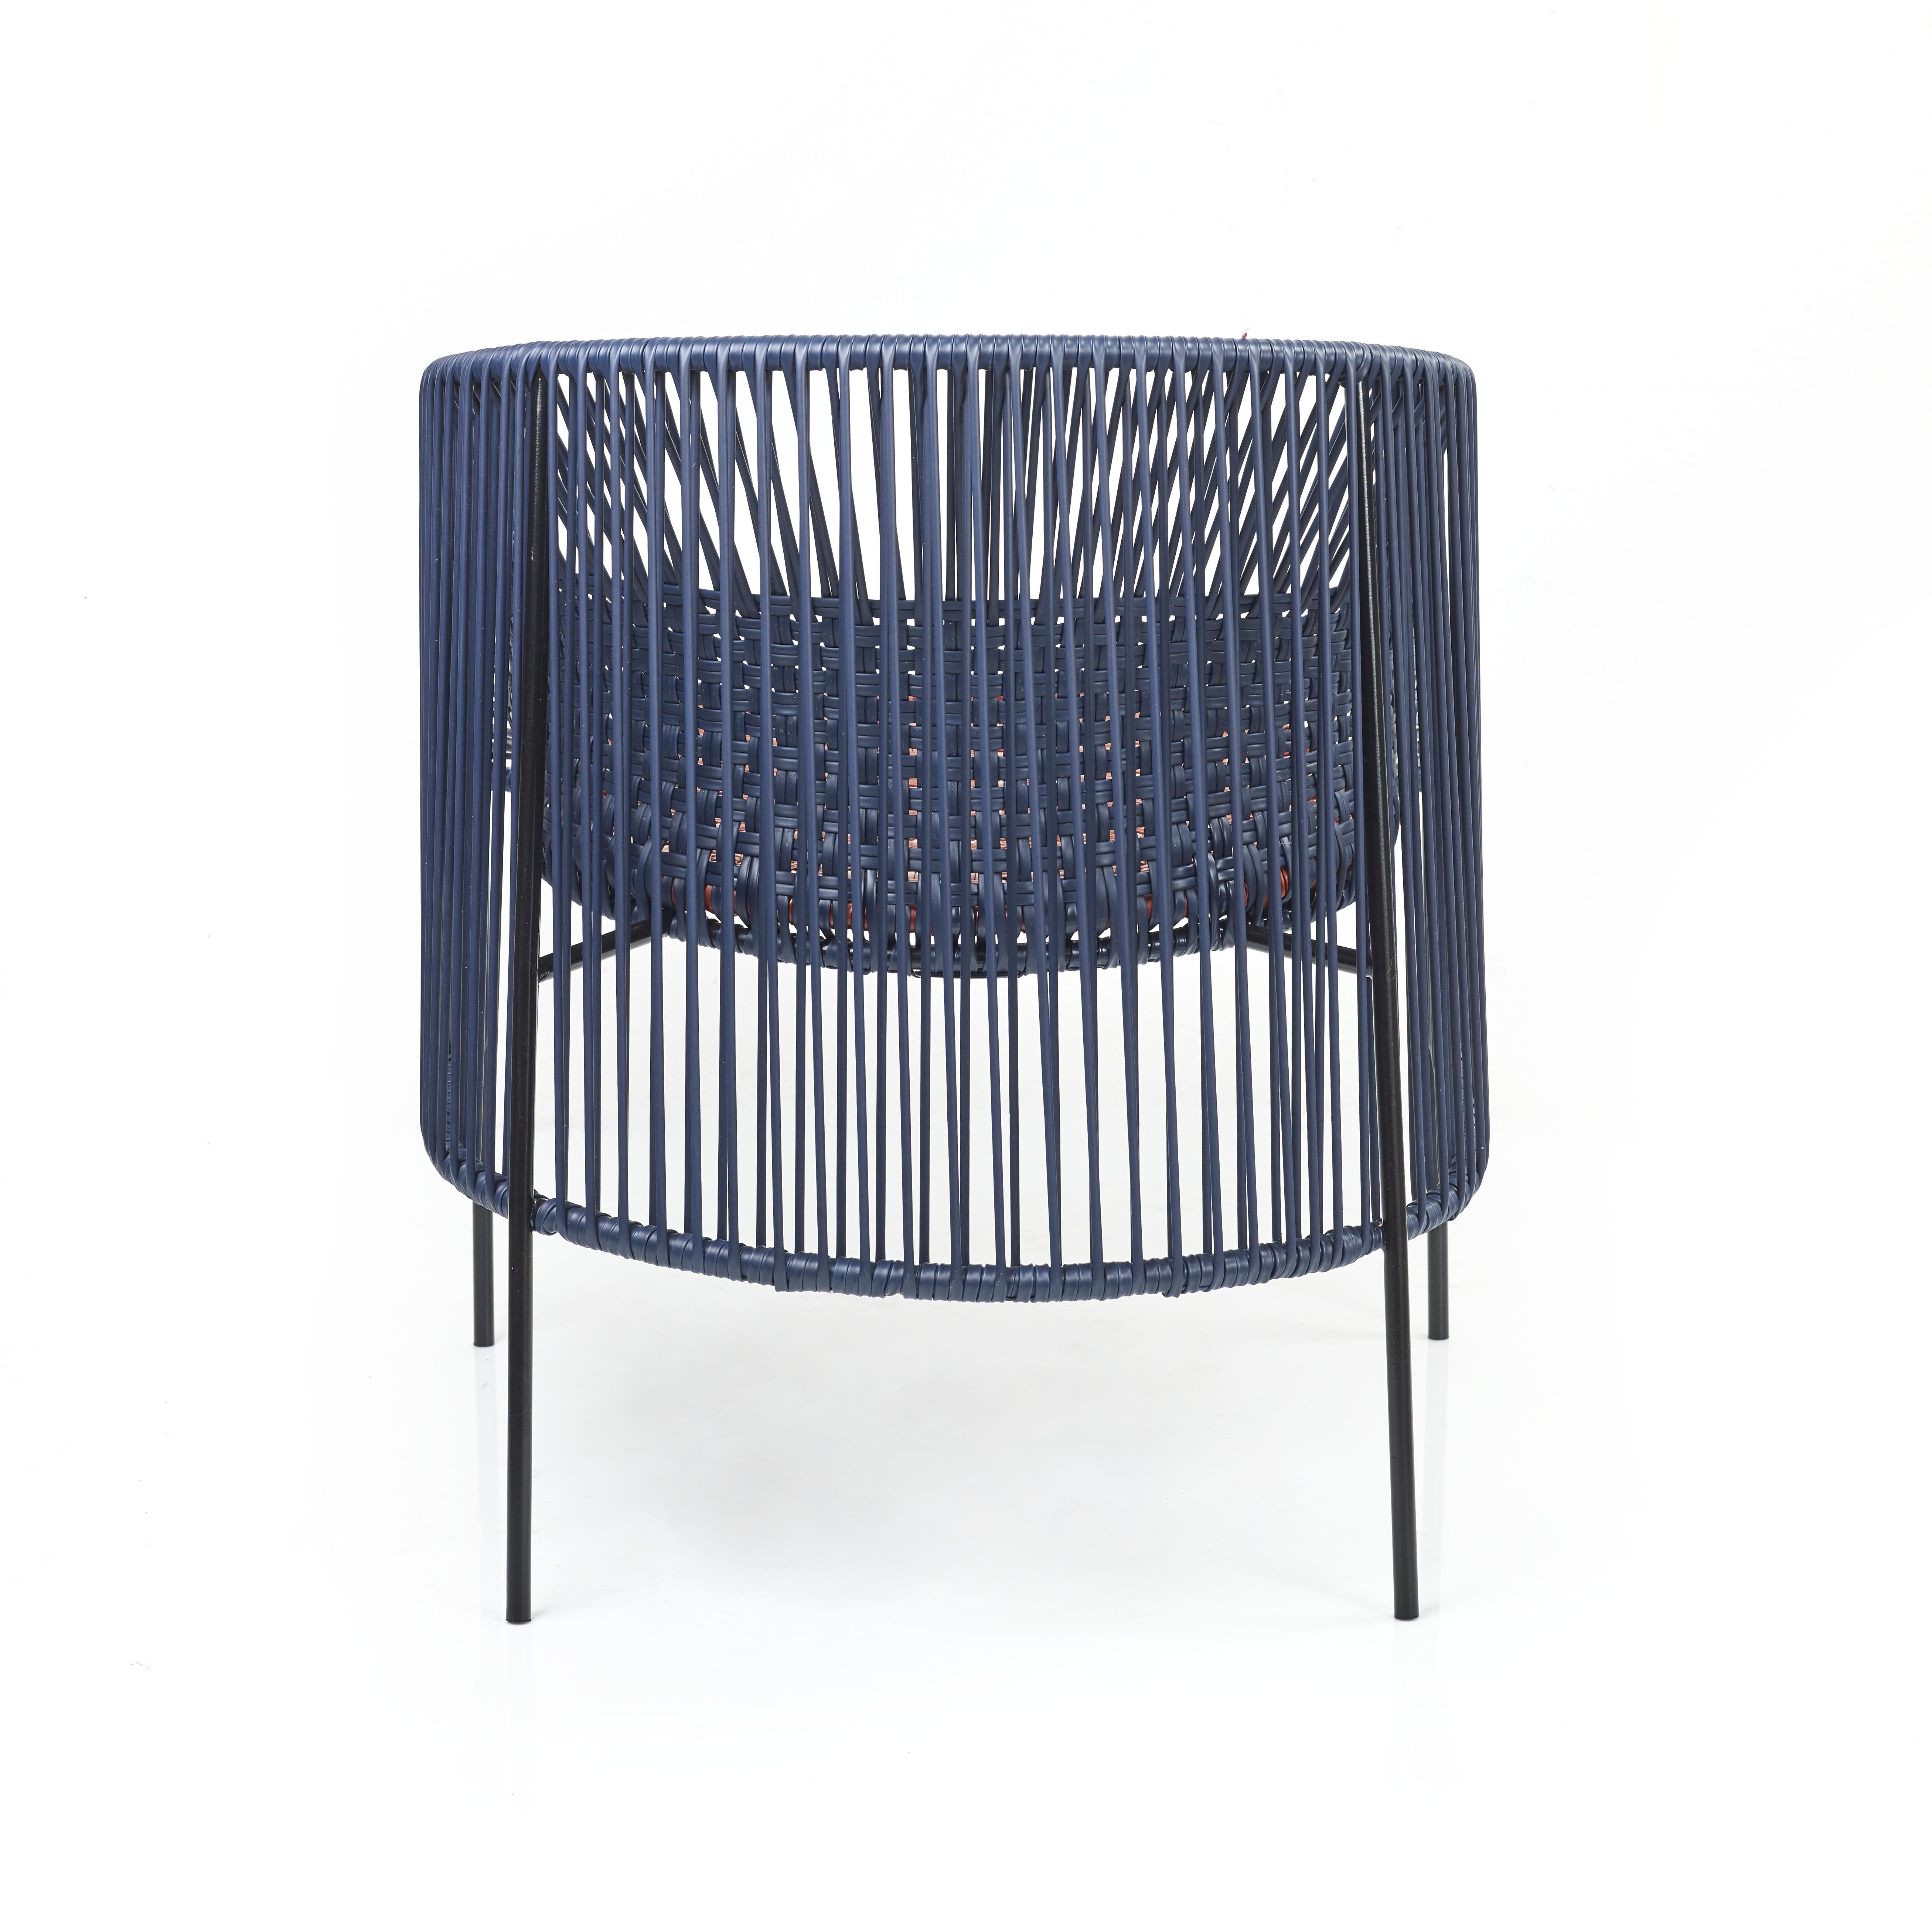 Powder-Coated Caribe Chic Lounge Chair by Sebastian Herkner For Sale